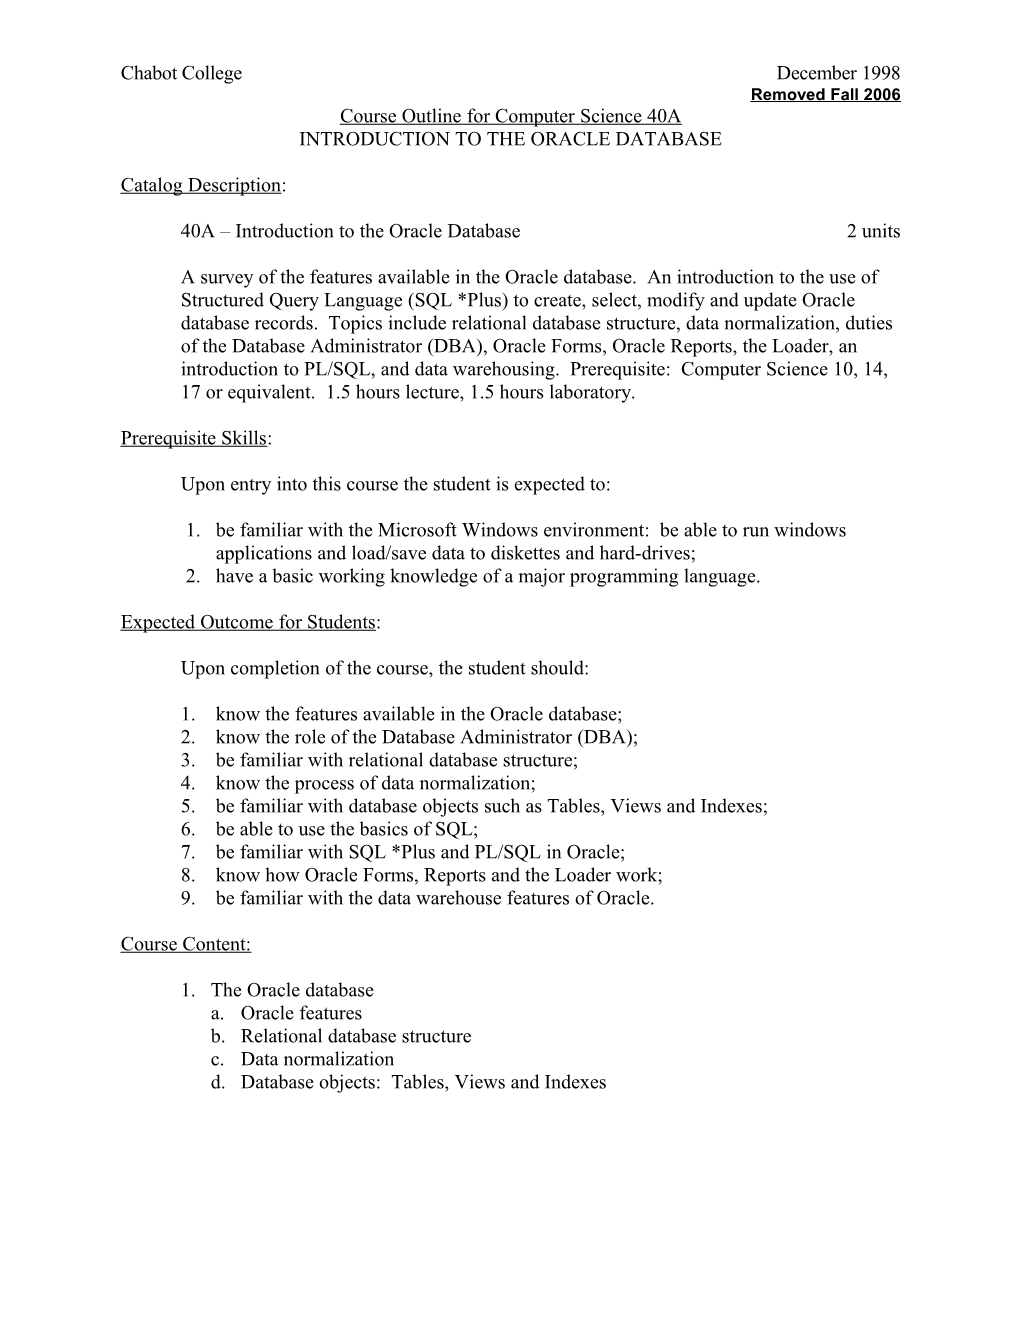 Course Outline for Computer Science 40A